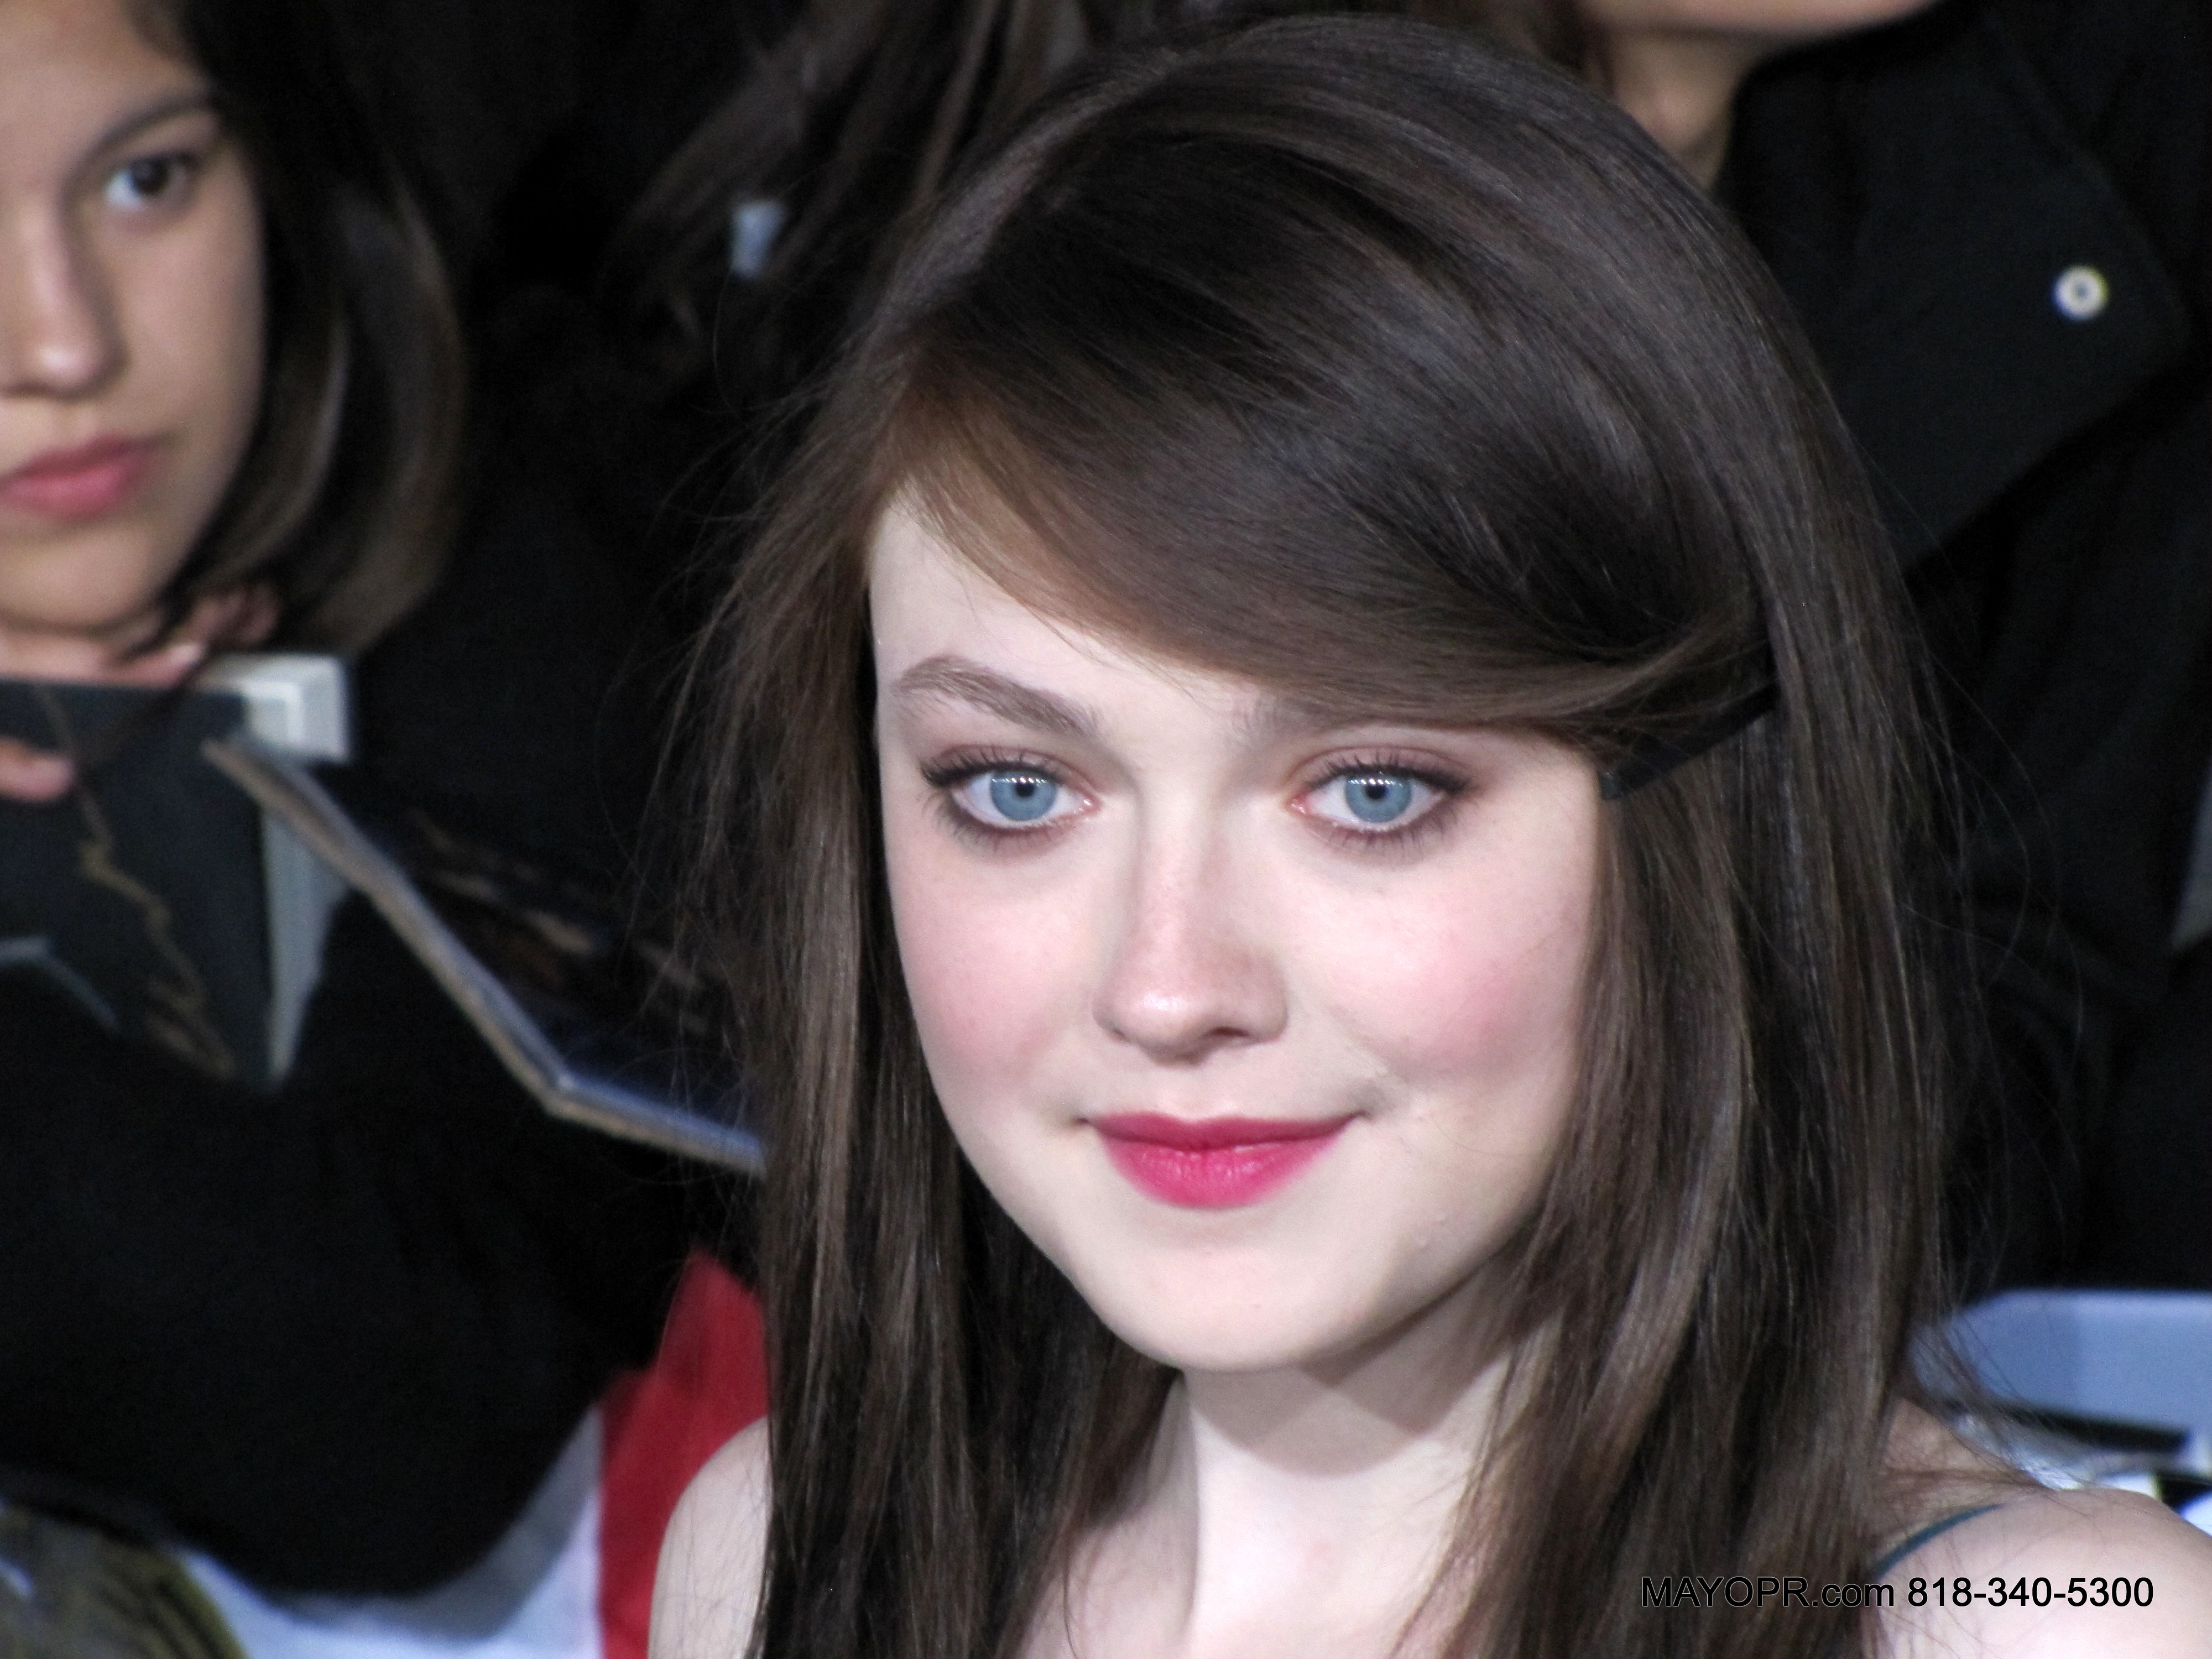 Dakota Fanning at the Premiere of The Twilight Breaking Dawn Part 2, Nokia LA Live Theater, Downtown Los Angeles, CA.